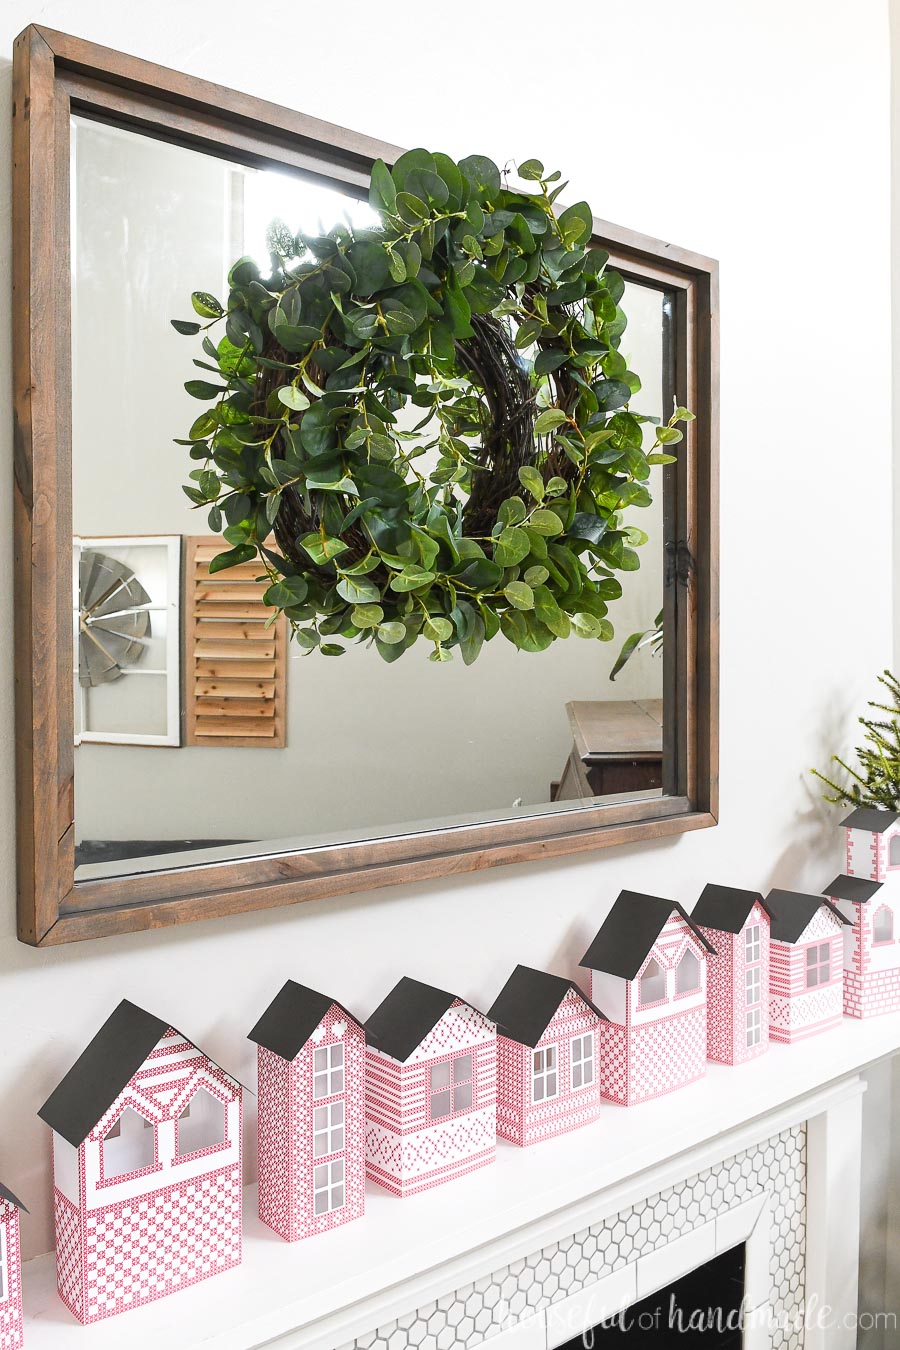 This eucalyptus wreath was made in just 7 minutes to hang as part of the Christmas mantel decor. 